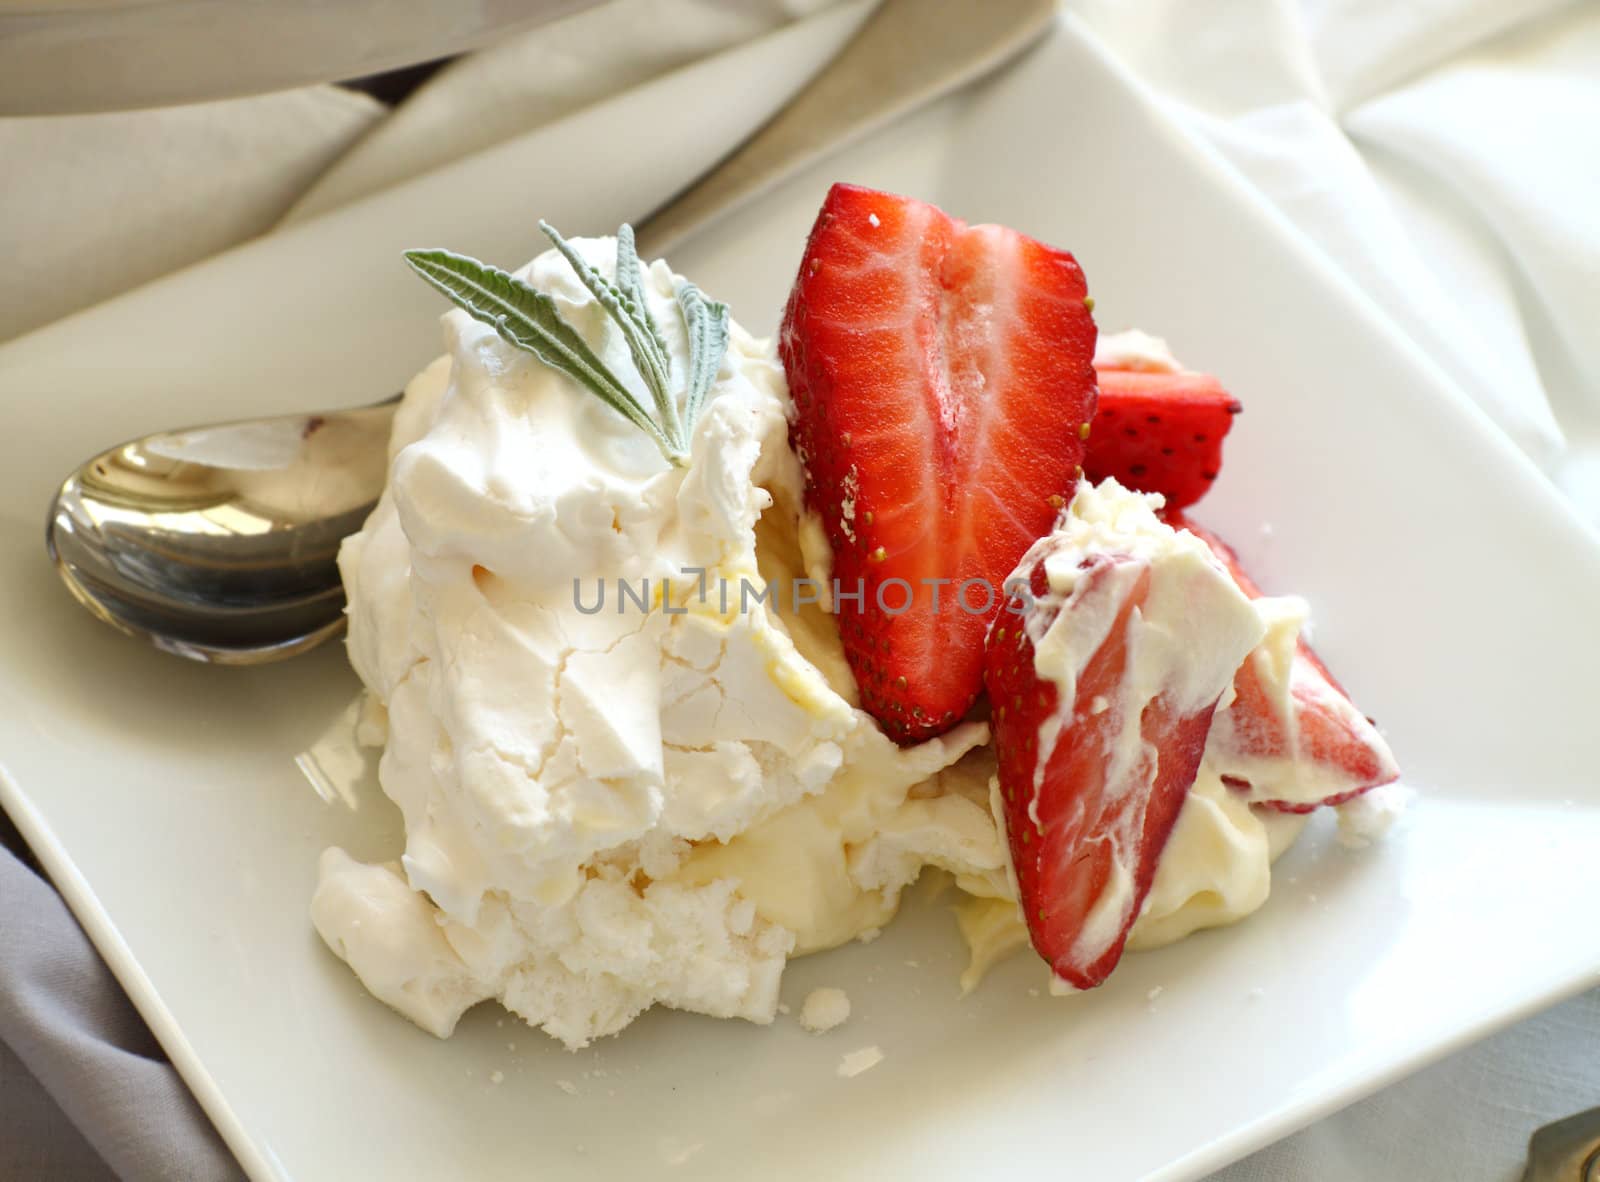 Delicious traditional Australian strawberry pavlova made from meringue and cream.